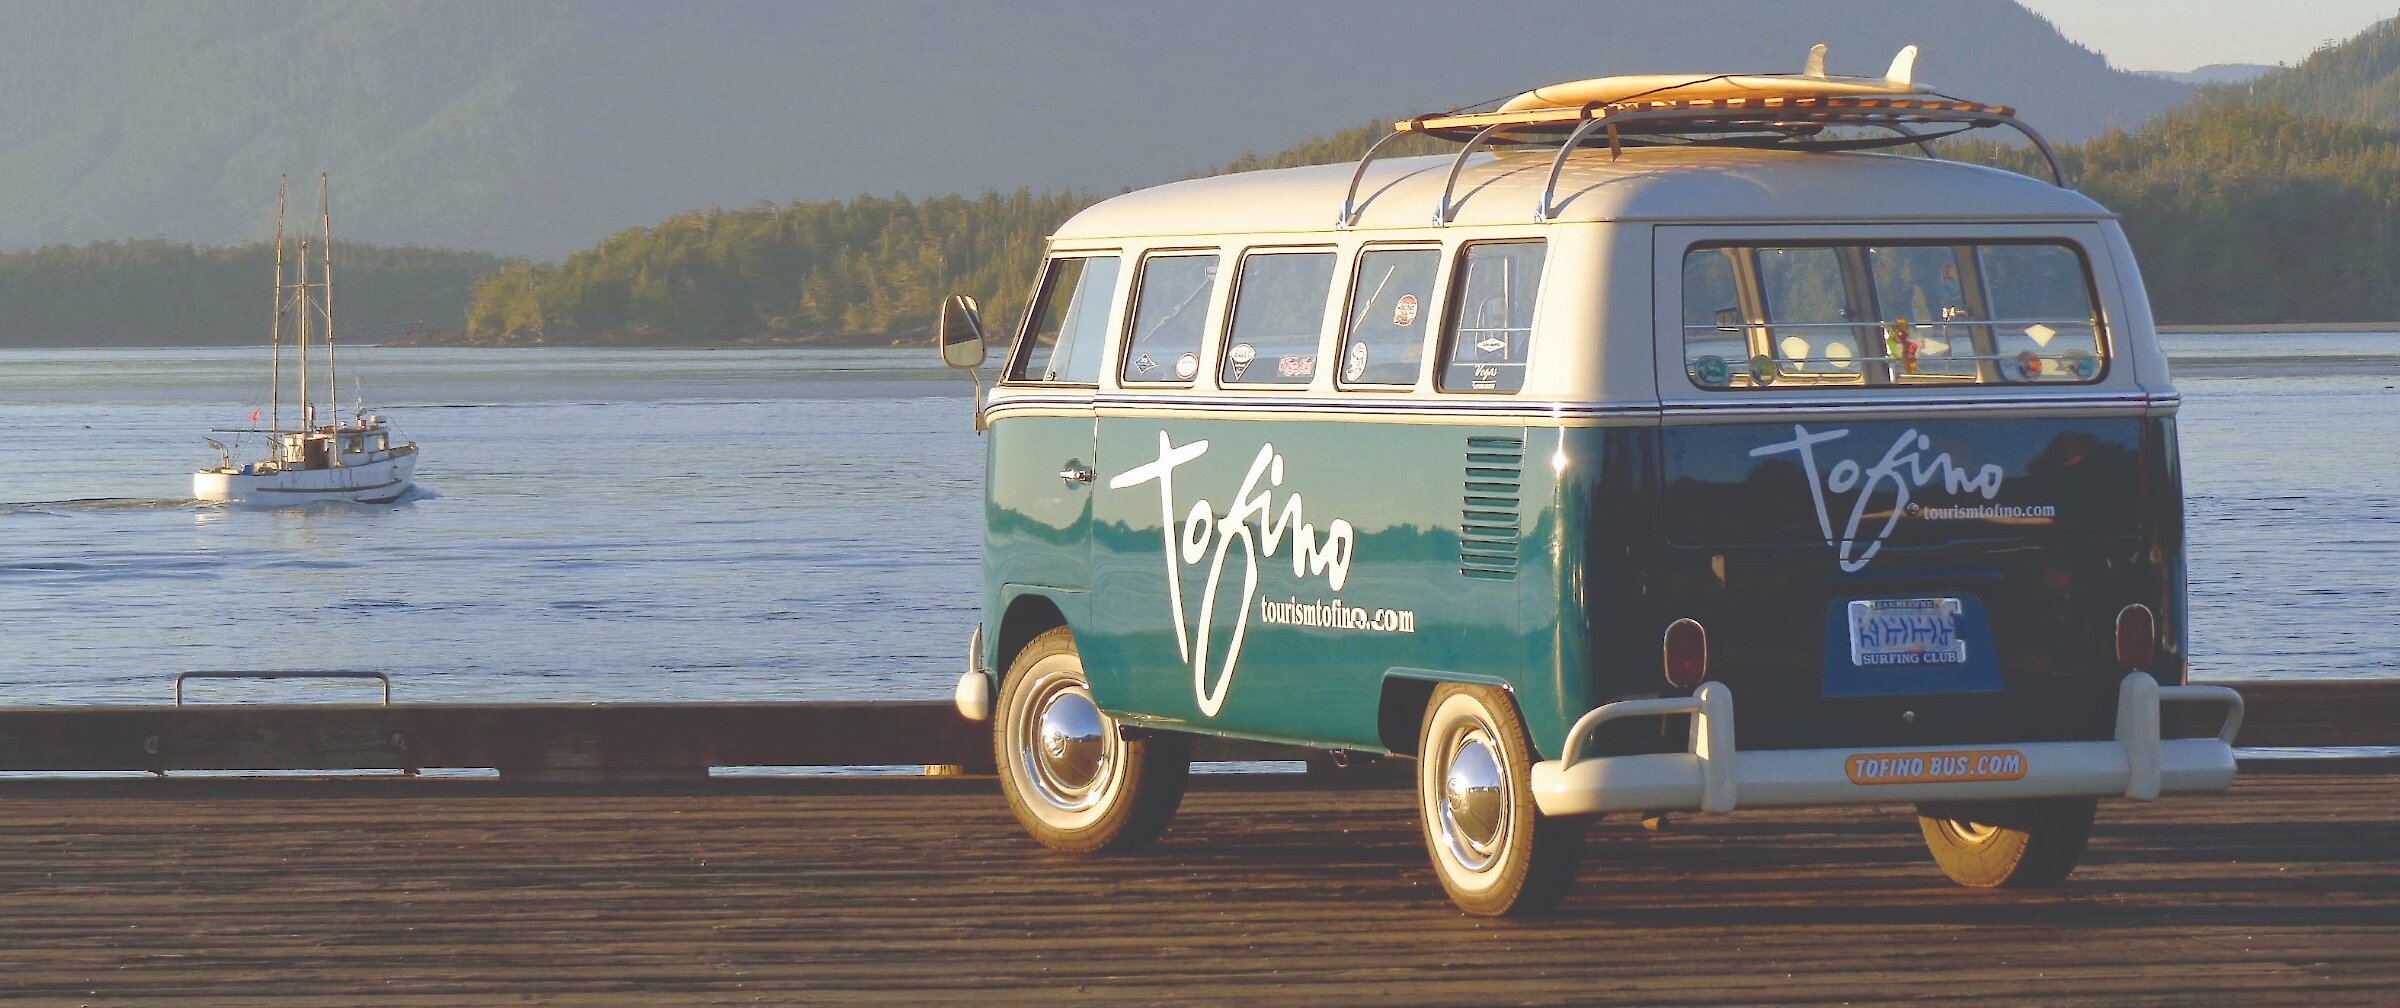 Tourism Tofino branded VW van parked on a doc with a surfboard on top